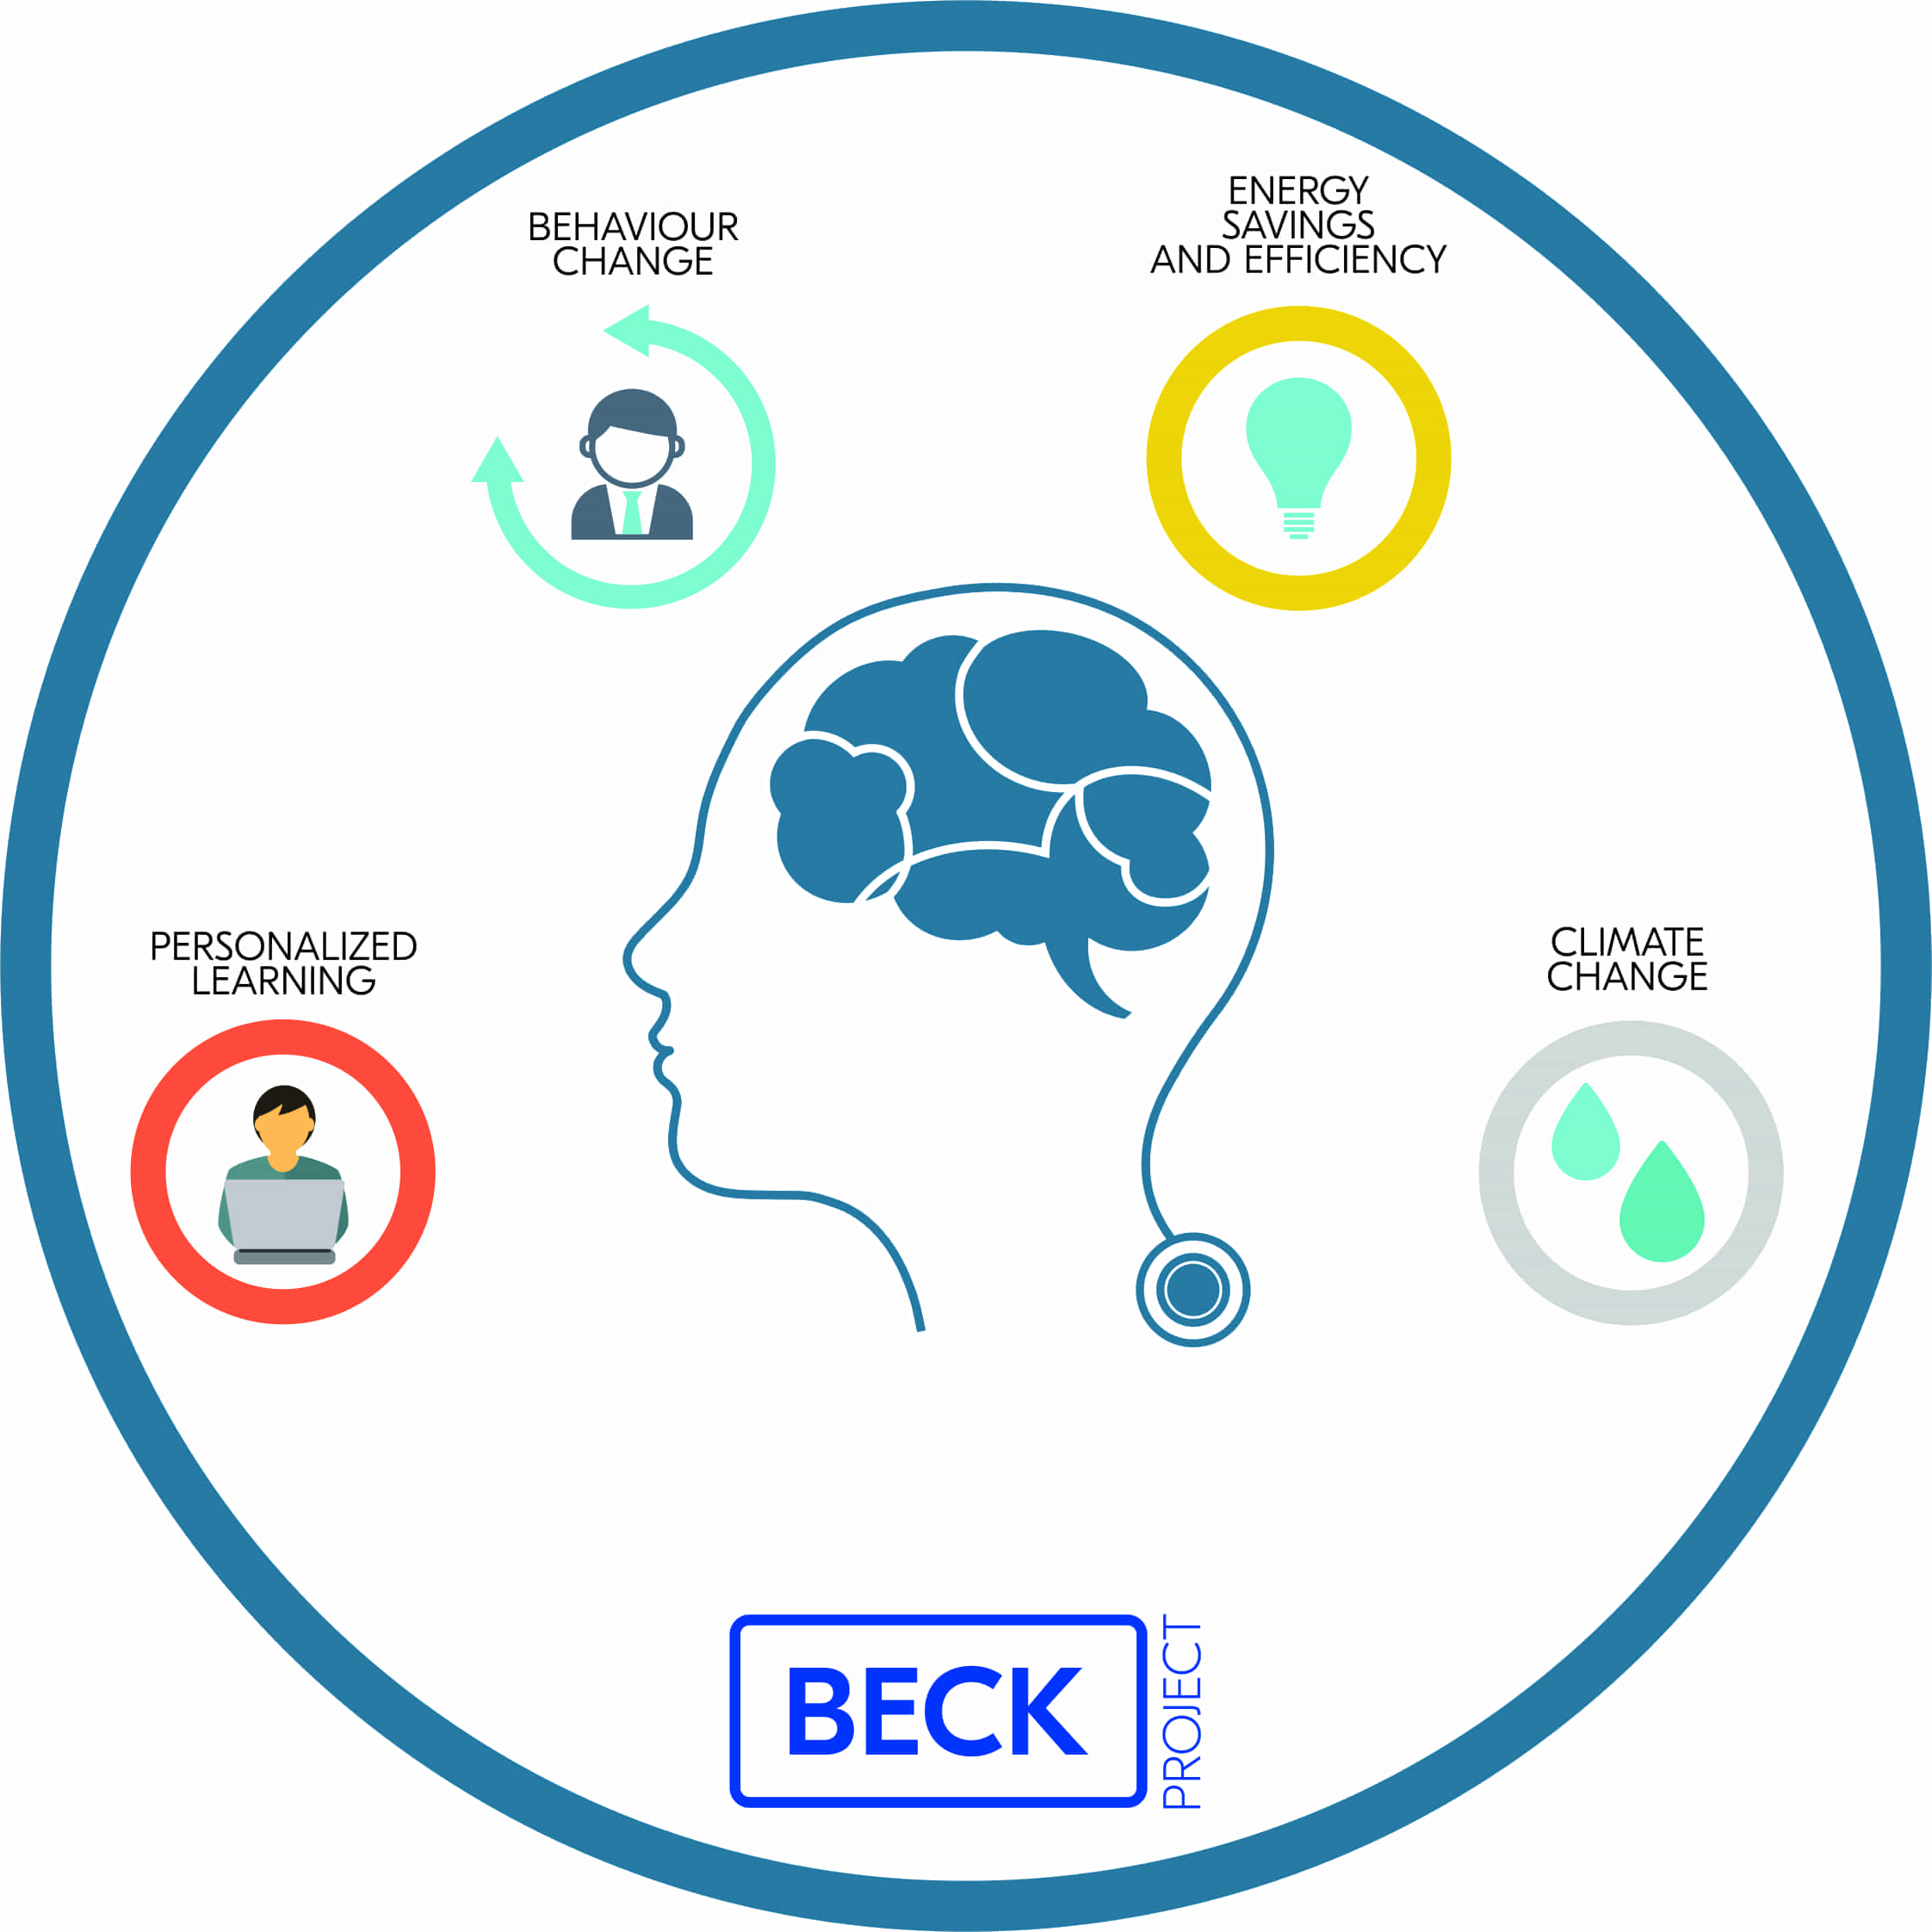 BECK- Integrating Education with Consumer Behaviour Relevant to Energy Efficiency and Climate Change at the Universities of Russia, Sri Lanka and Bangladesh